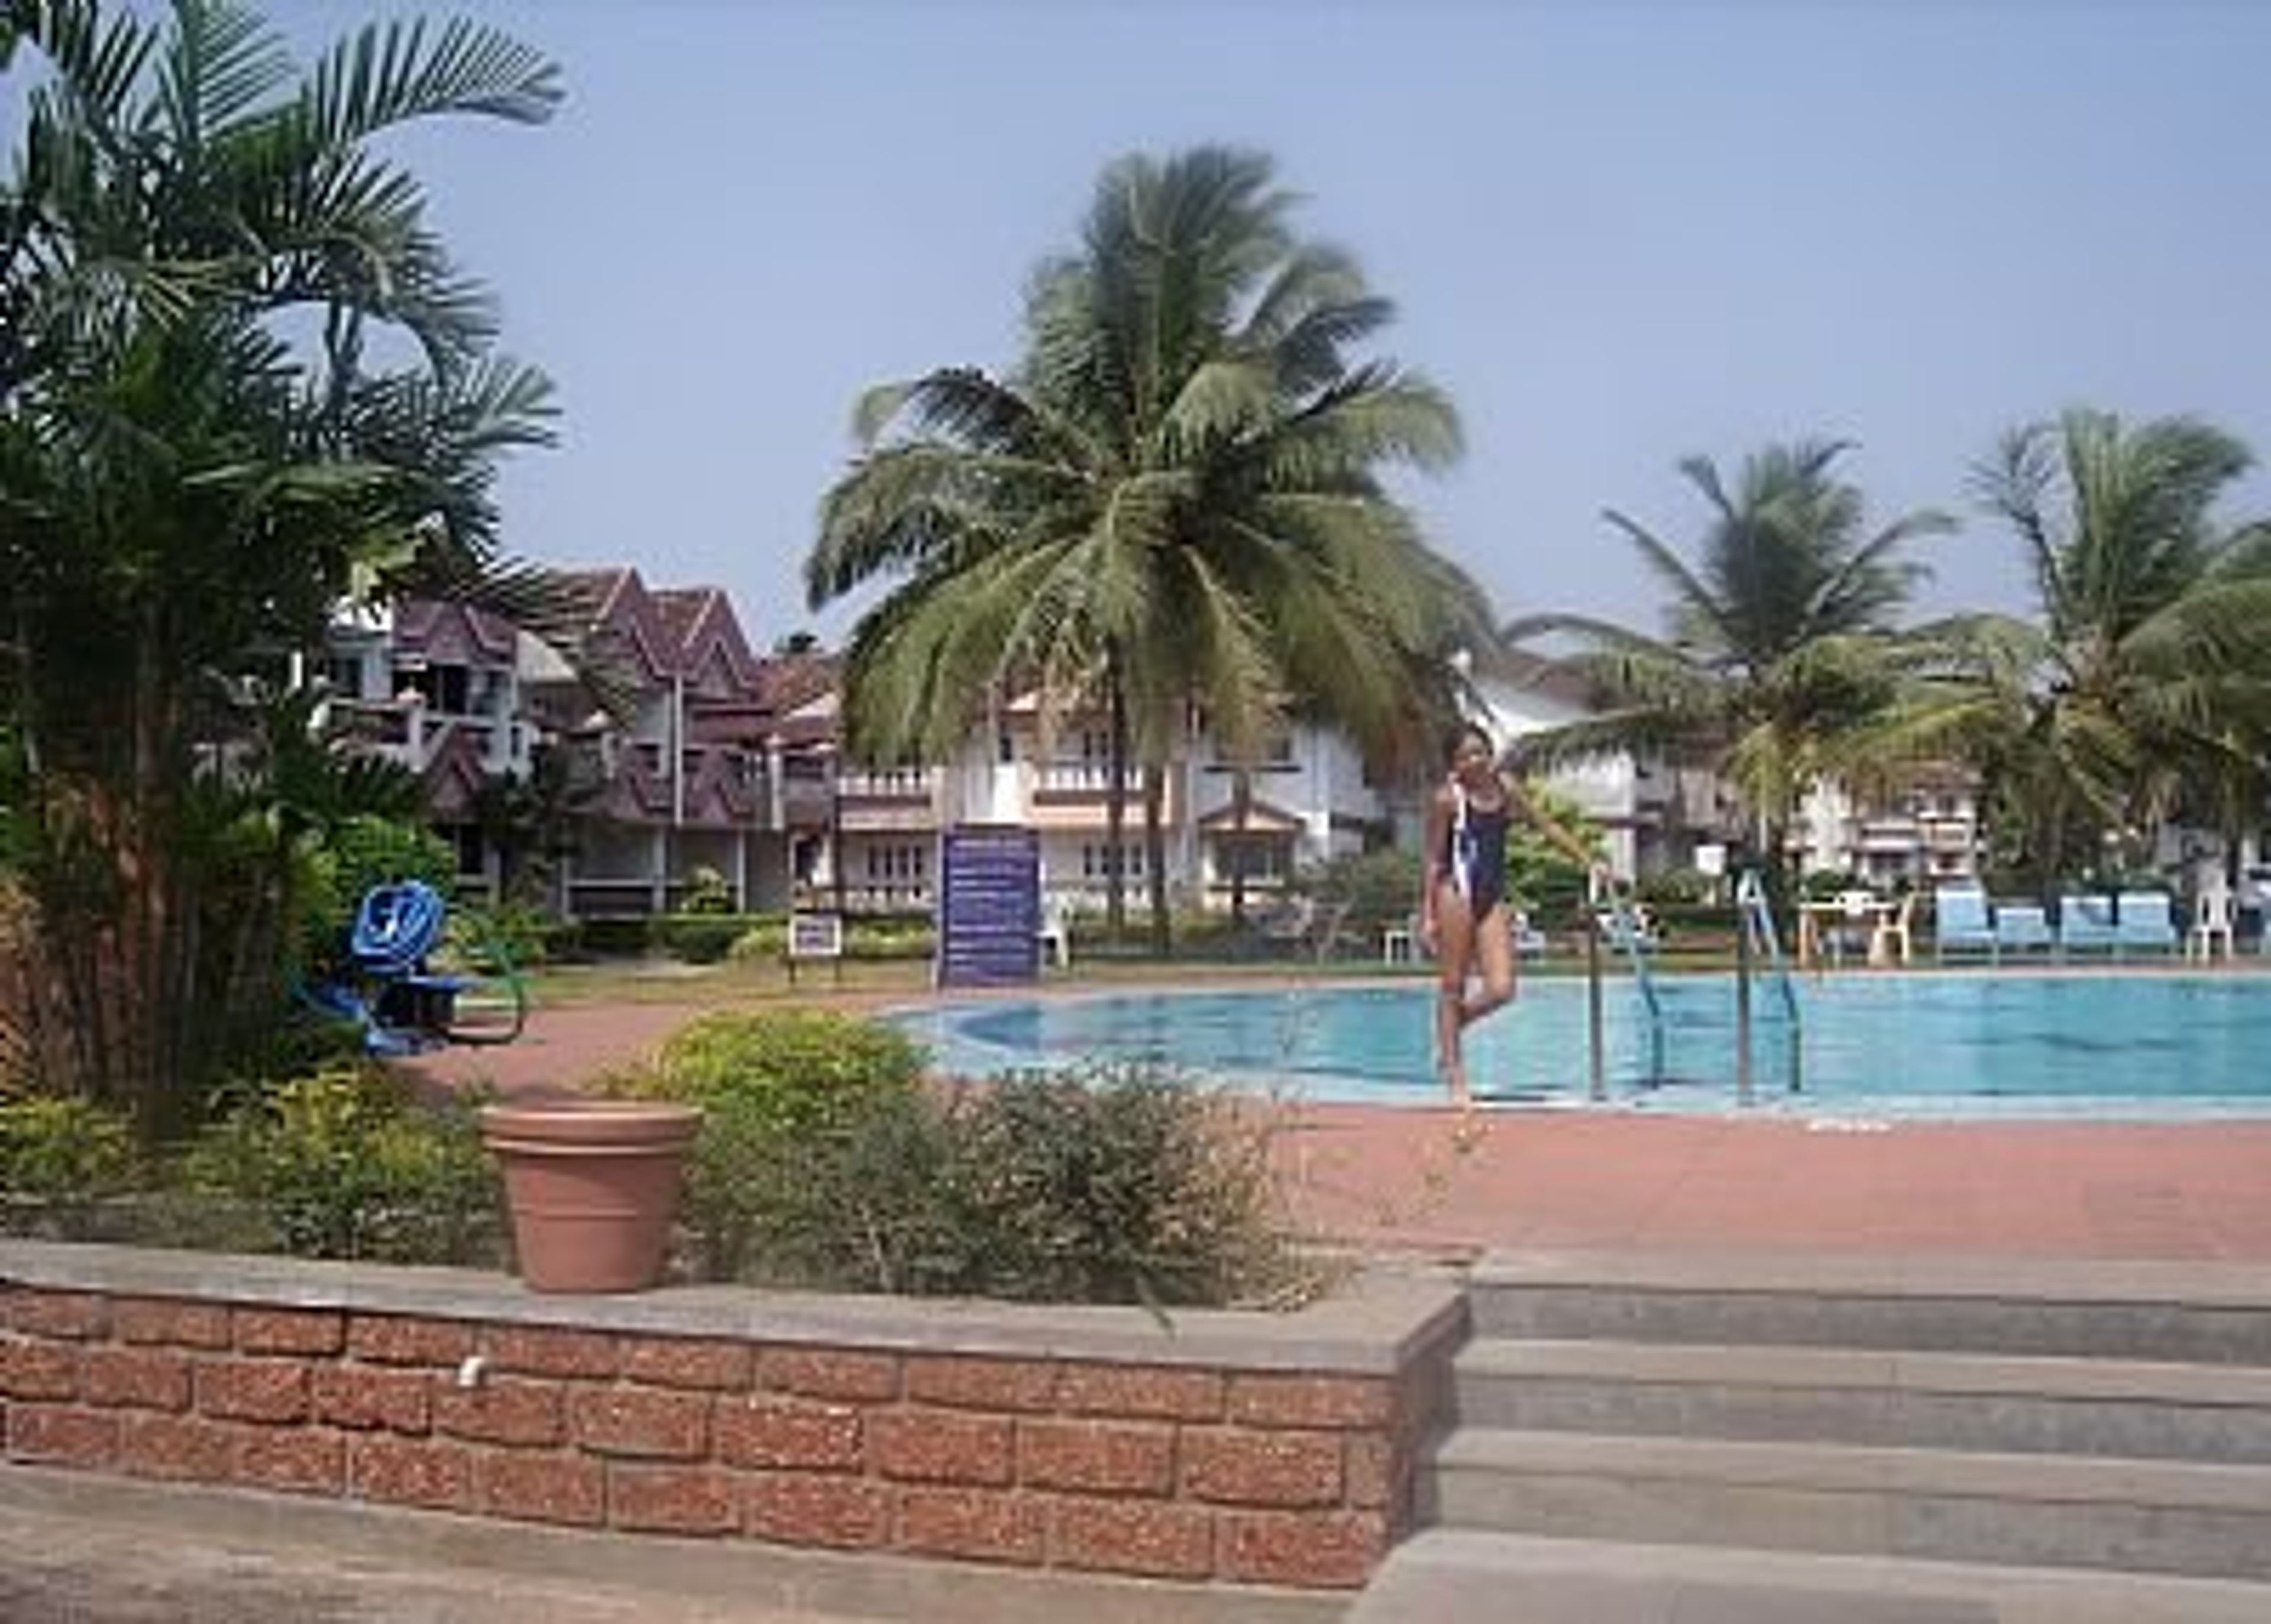 view to pool